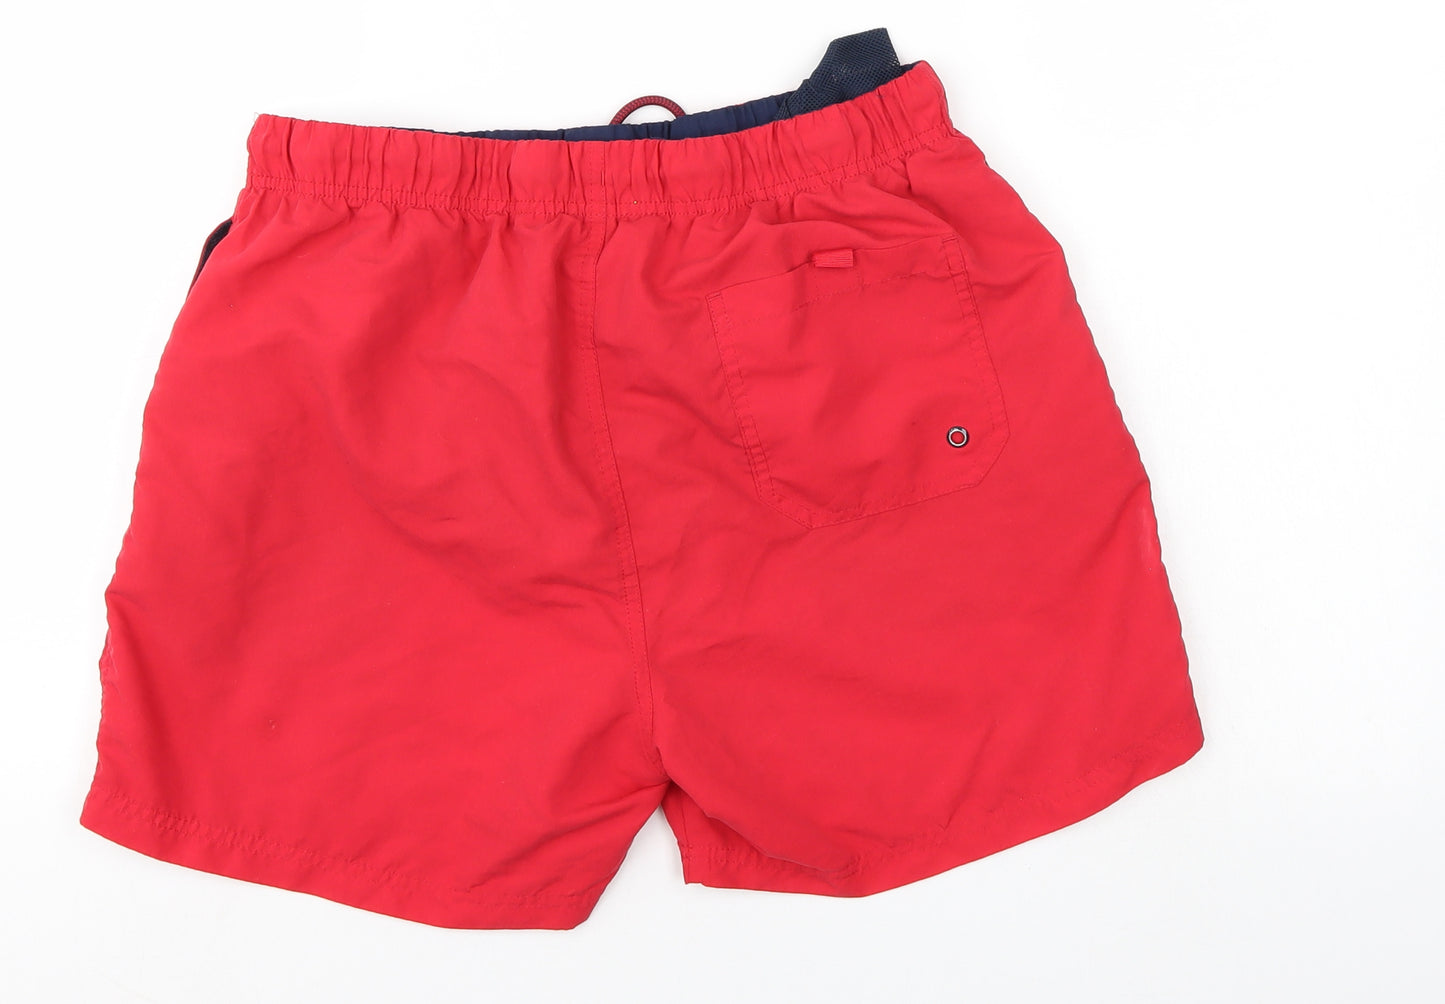 Cedar Wood State Mens Red   Sweat Shorts Size M